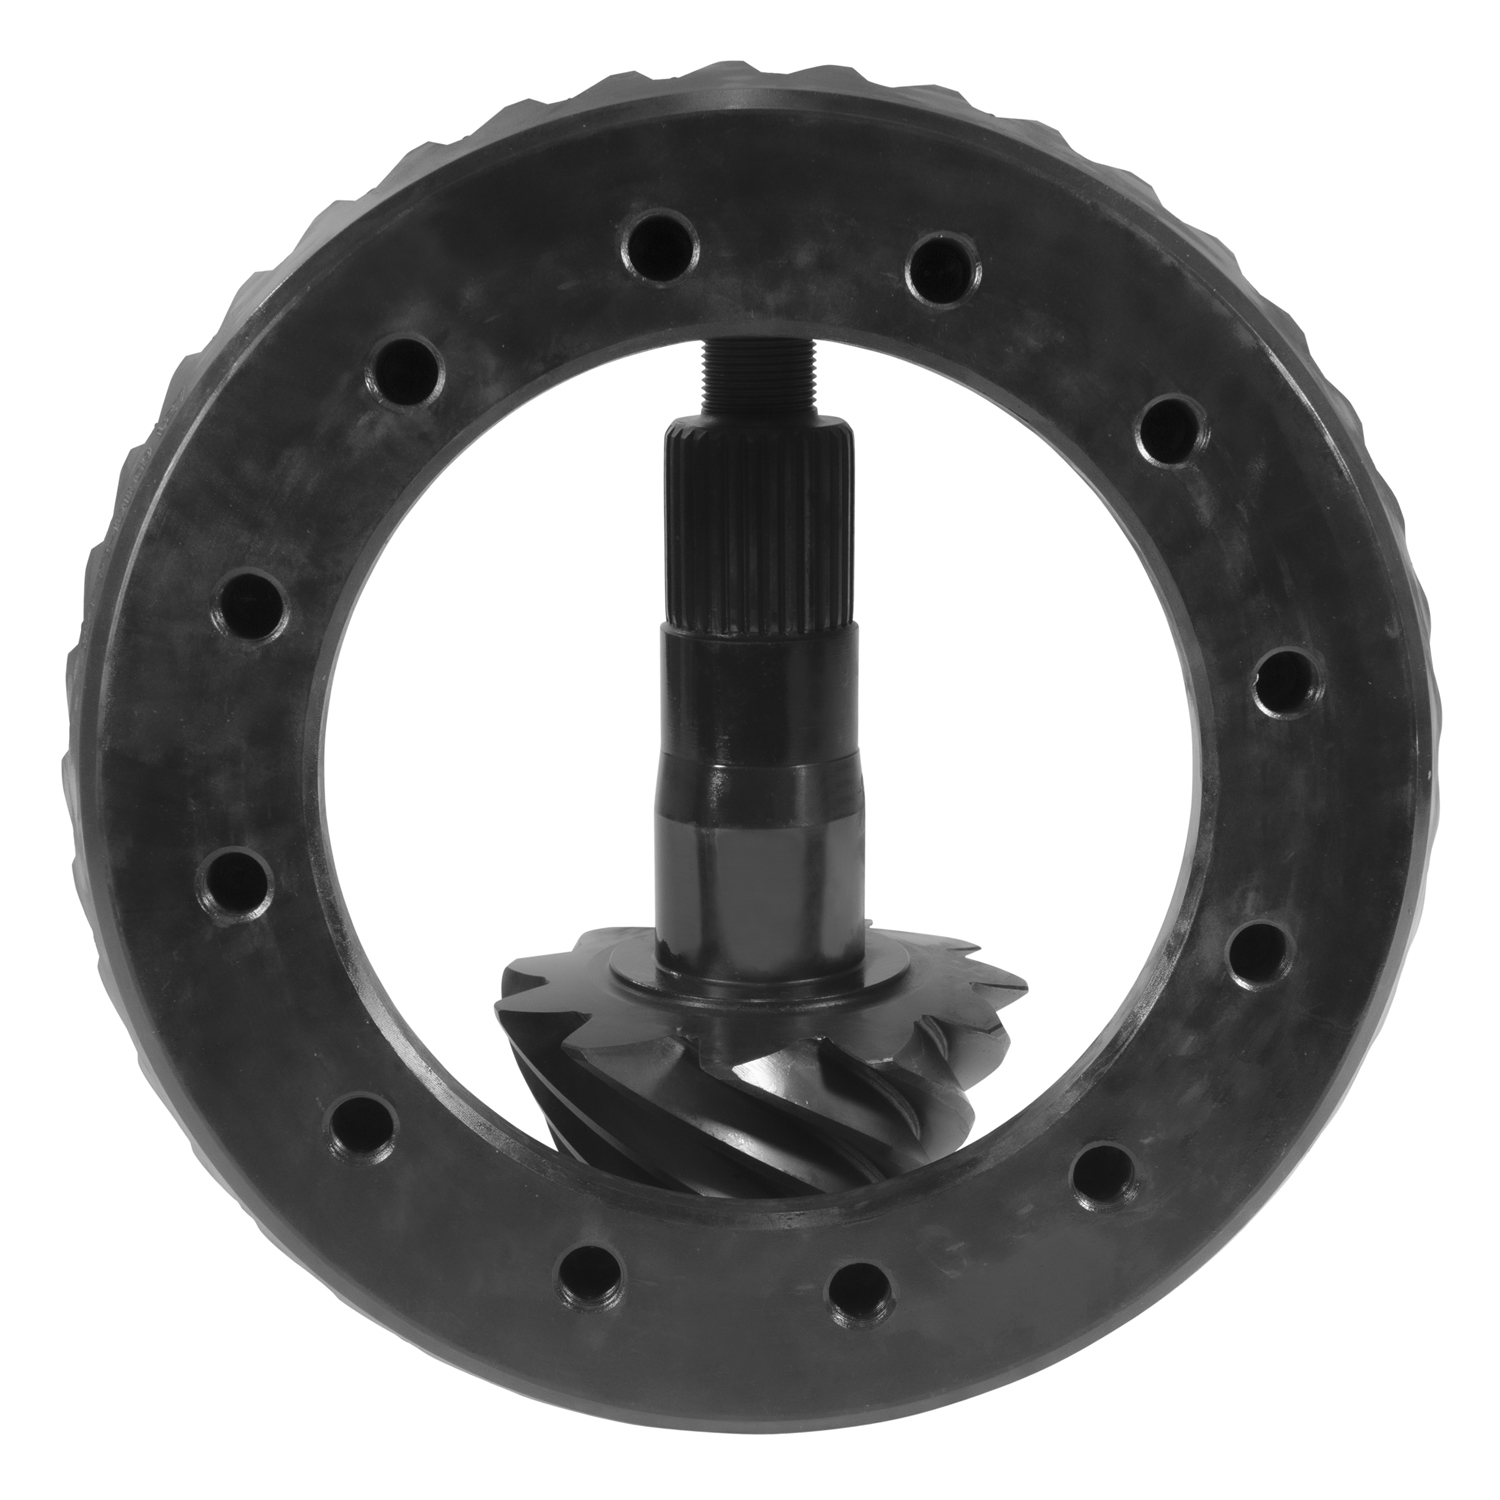 USA Standard Gear ZG GM14T-373 Ring & Pinion Gear Set for GM 14-Bolt Truck 10.5 Differential 